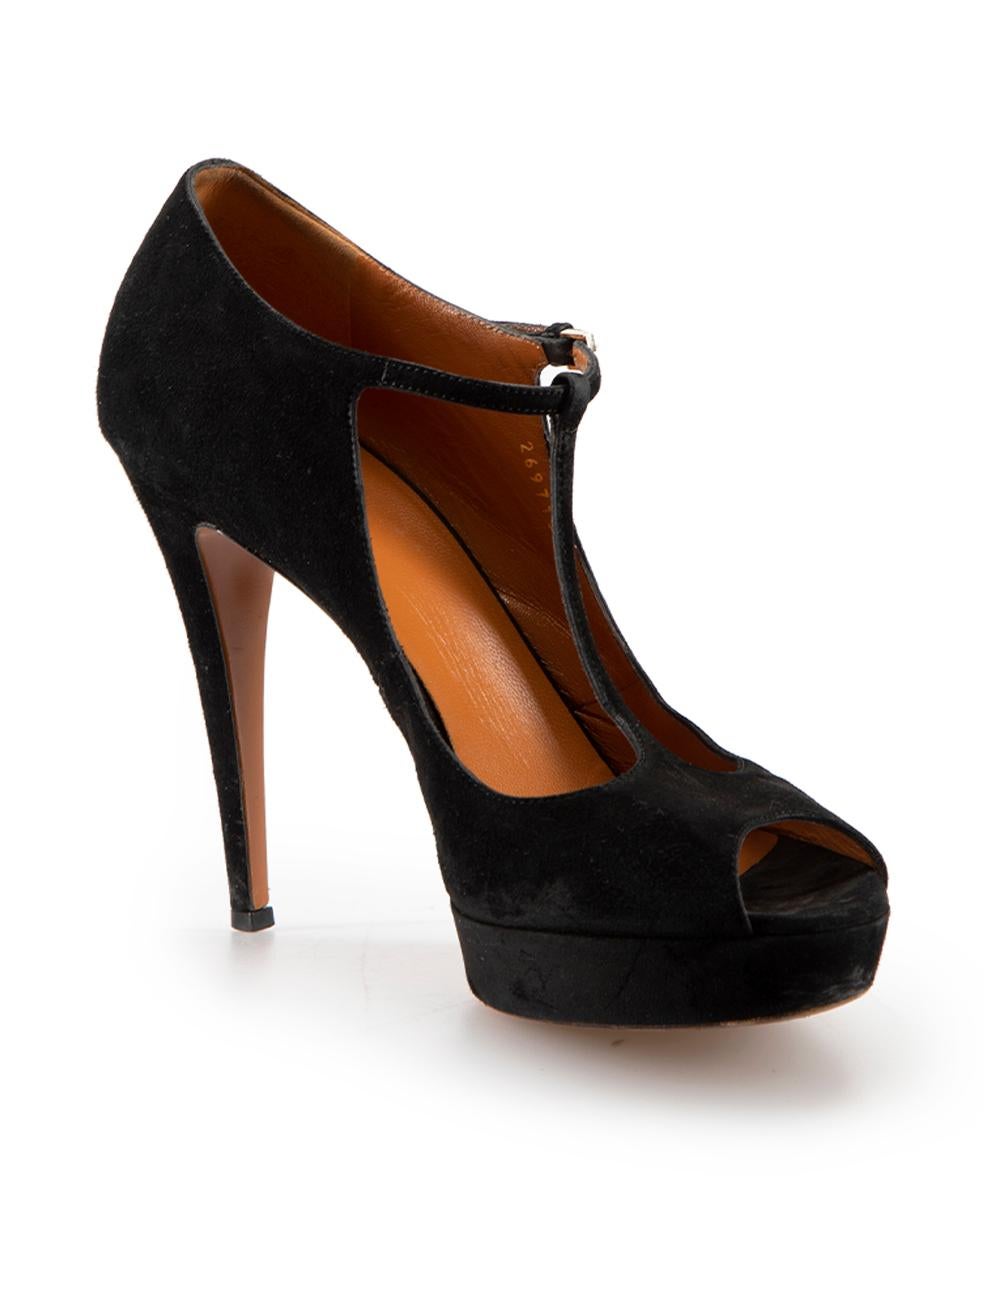 CONDITION is Good. General wear to shoes is evident. Moderate signs of wear to both sides and heels of both shoes on this used Gucci designer resale item. These shoes come with original box.



Details


Black

Suede

T bar heels

Peep toe

Platform